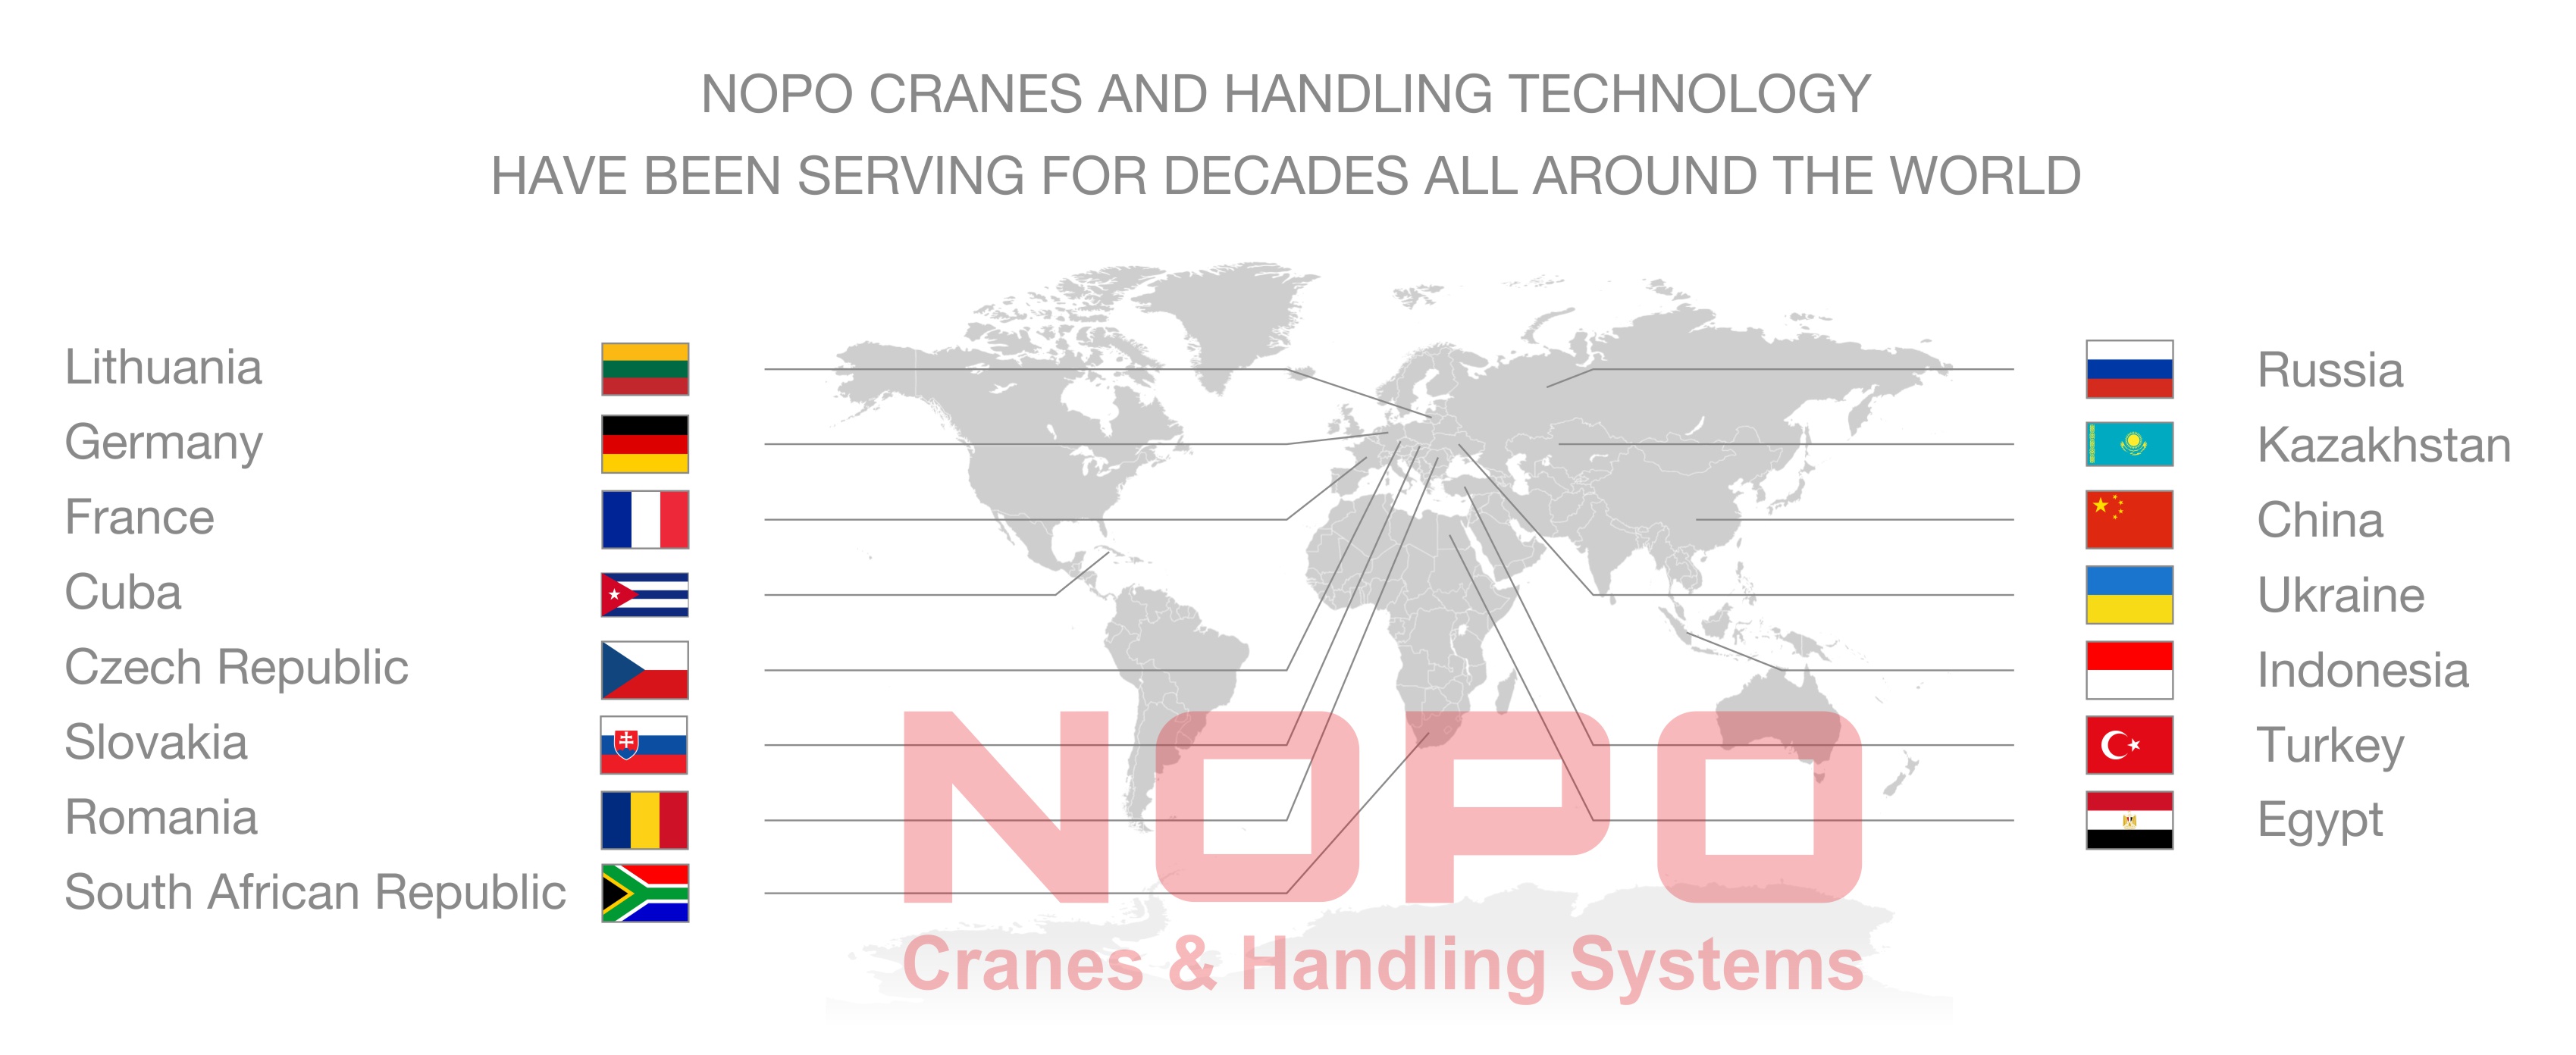 NOPO cranes and handling technology have been serving for decades all aroud the world